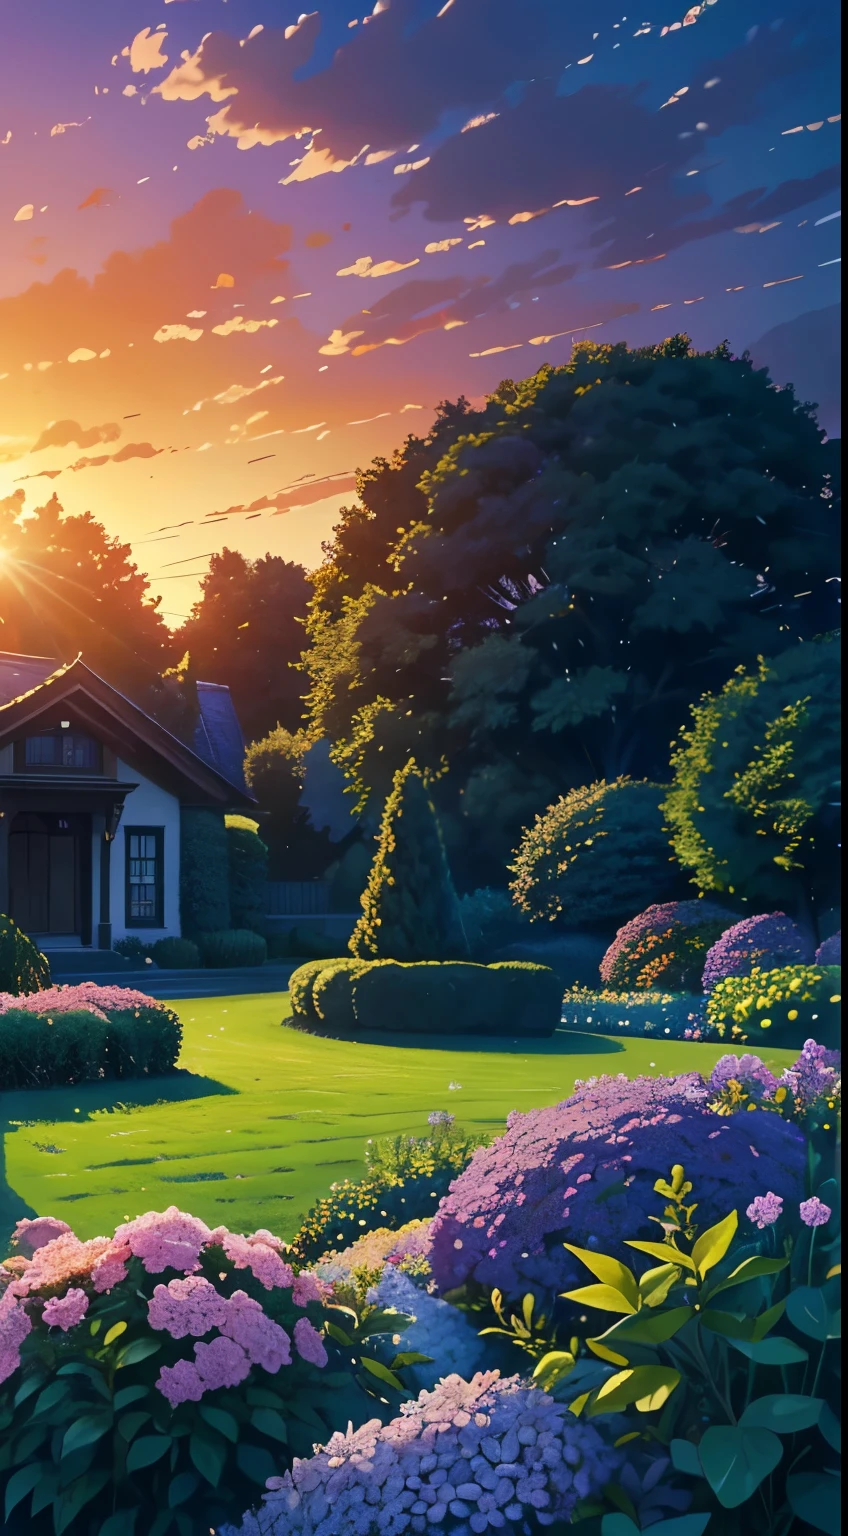 (masterpiece), beautiful  garden, sunset, The Garden of Words, gorgeous, nature, purple flowers, after rain, grass, beautiful sky, gogeous clouds, 4k, smilling, happy,happyness, soft, wallpaper,cute, hope, BREAK the image transmit a hopeful feeling, good vibes, happy atmosphere, beauty on the small details, a visual masterpiece, beautiful colors